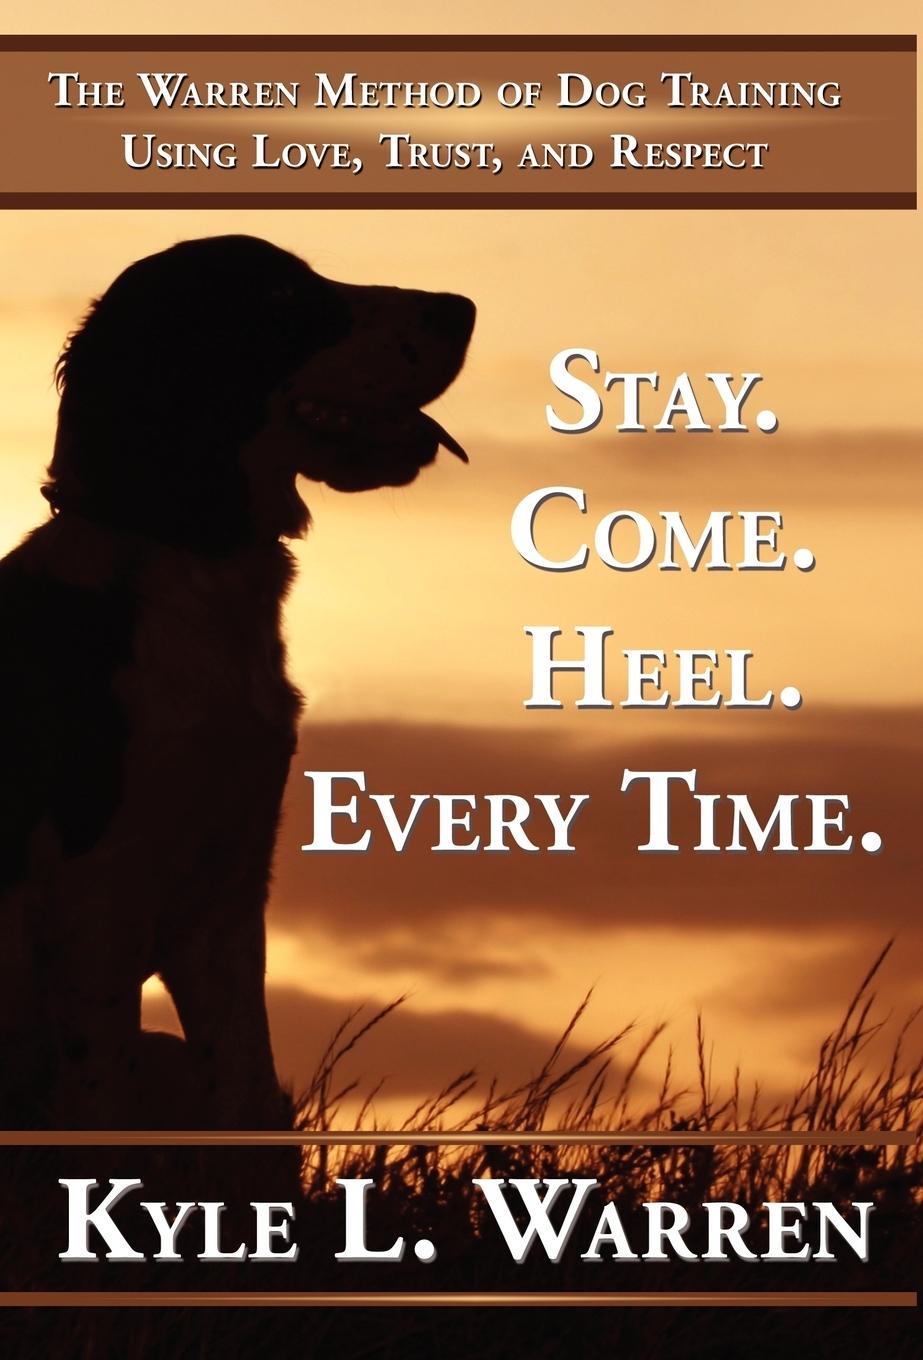 Stay. Come. Heel. Every Time